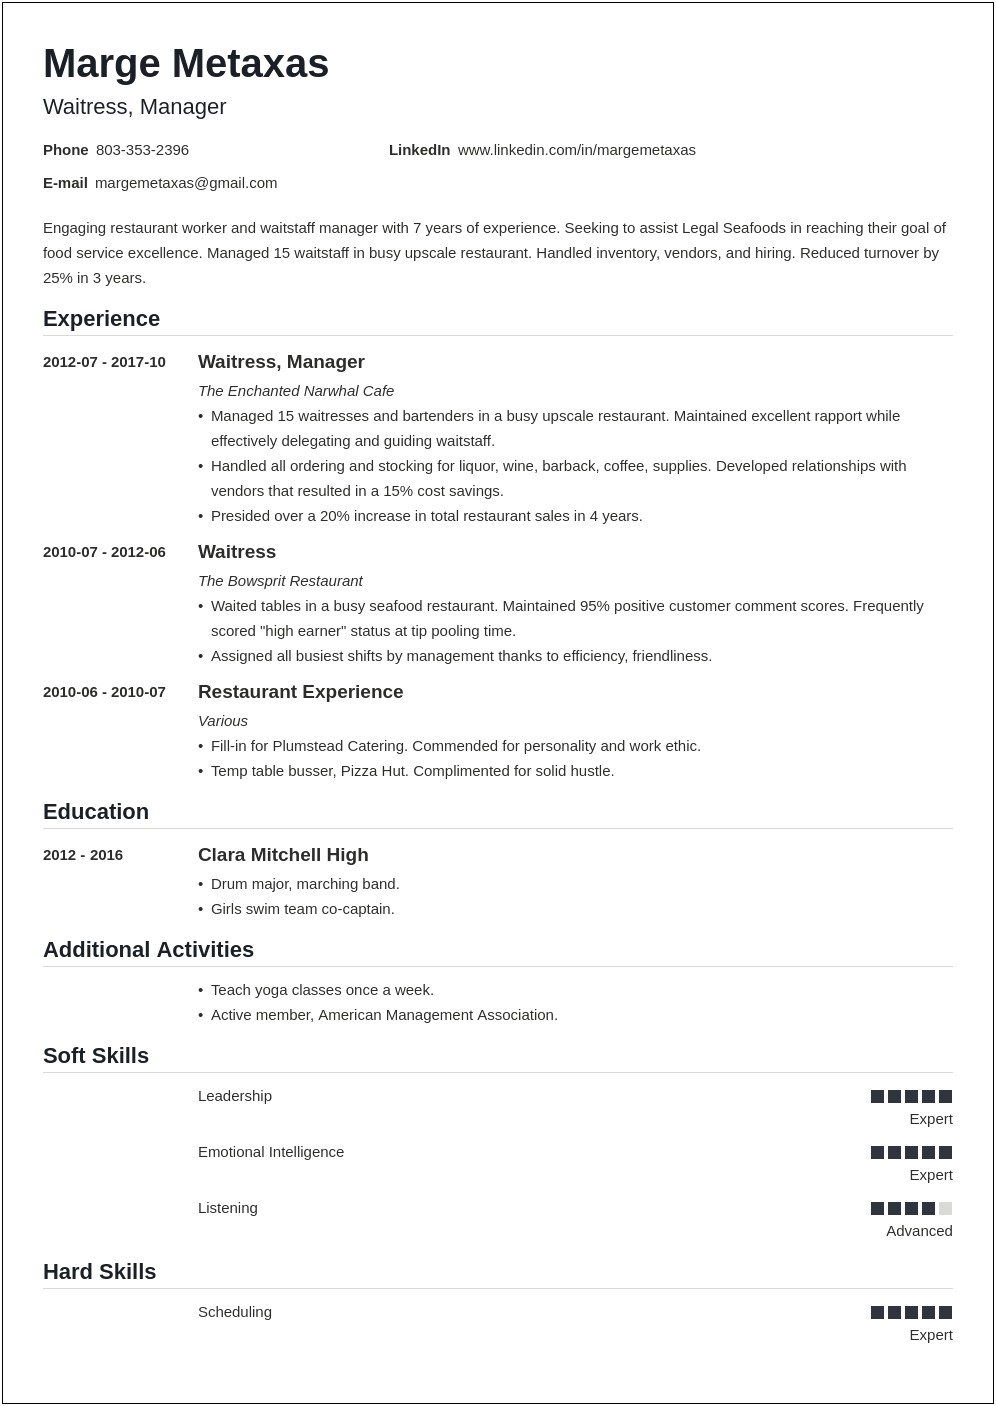 Resume Examples With Restaurant Experience To Highlight Teamwork